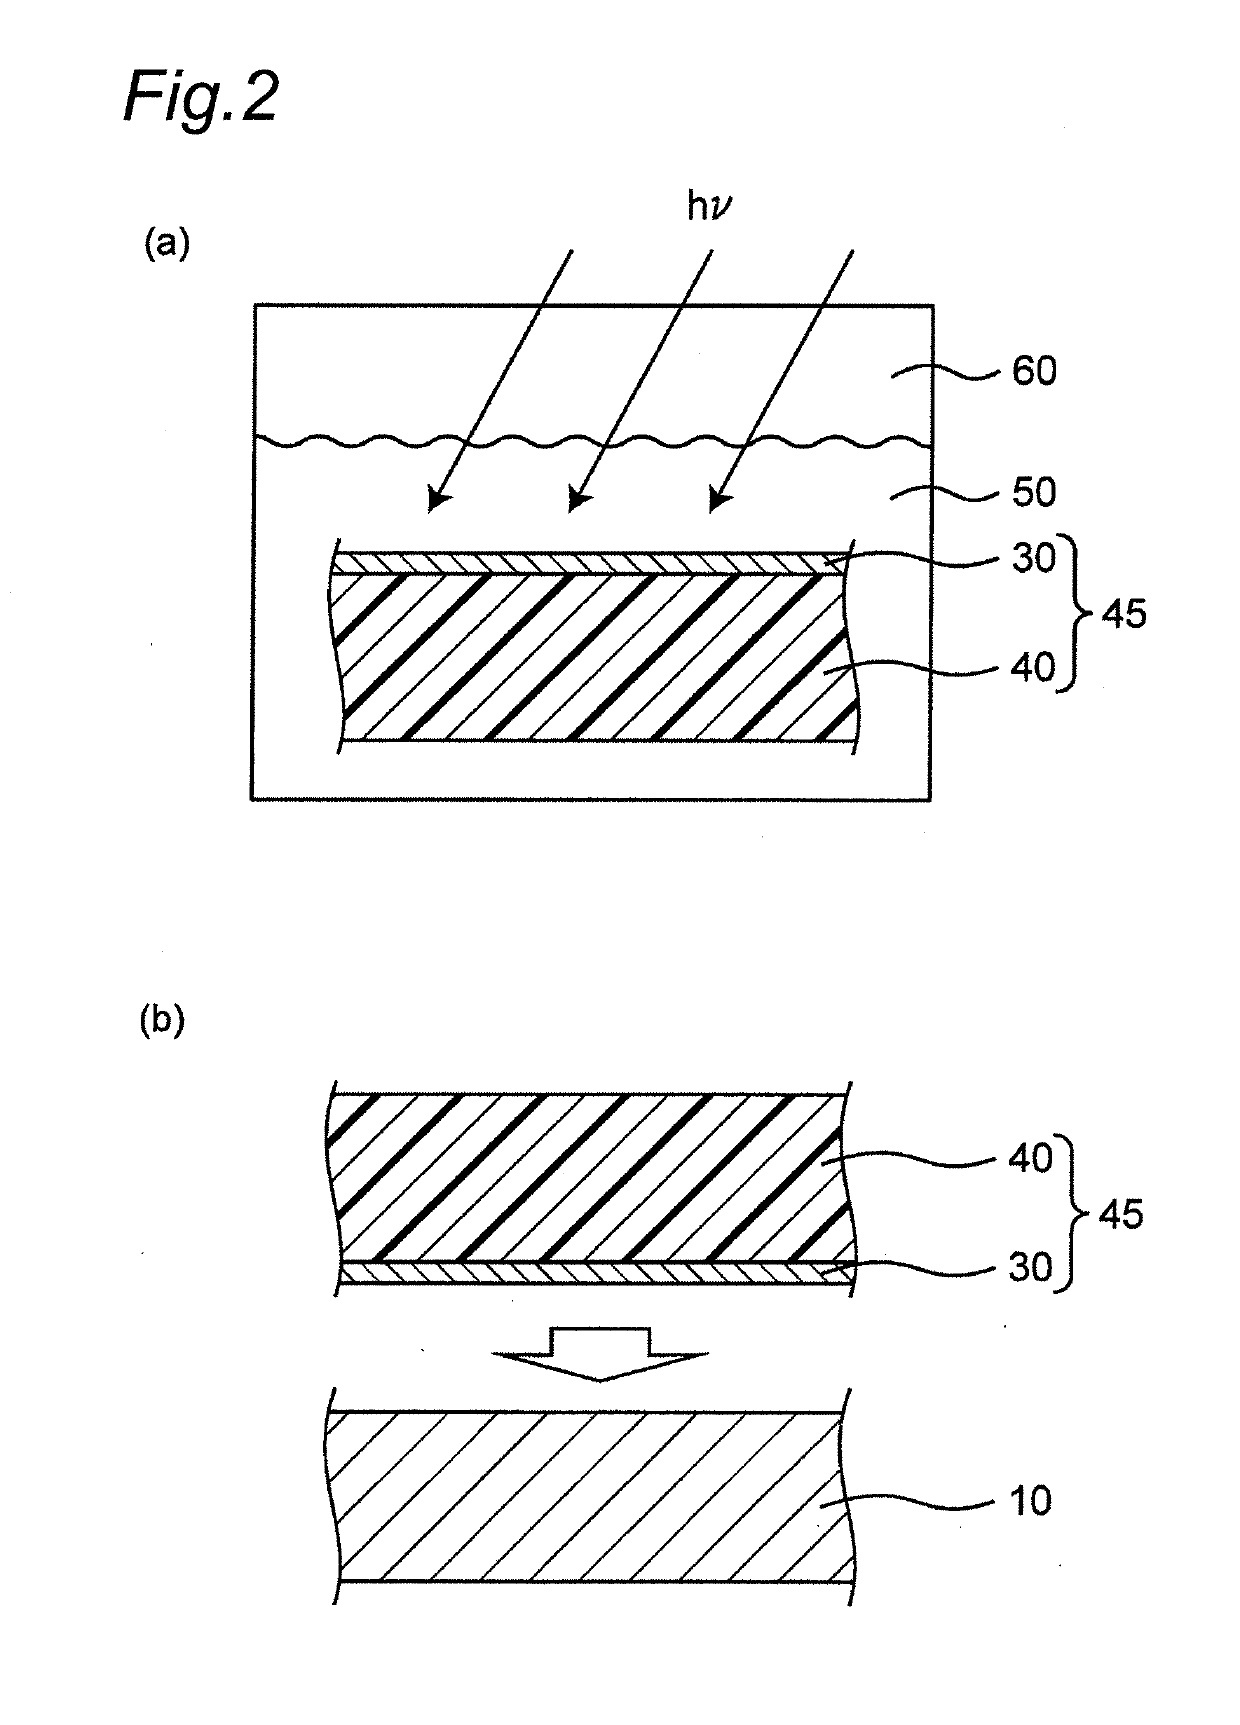 Copper Alloy Article Containing Polyester-Based Resin and Method for Producing the Same